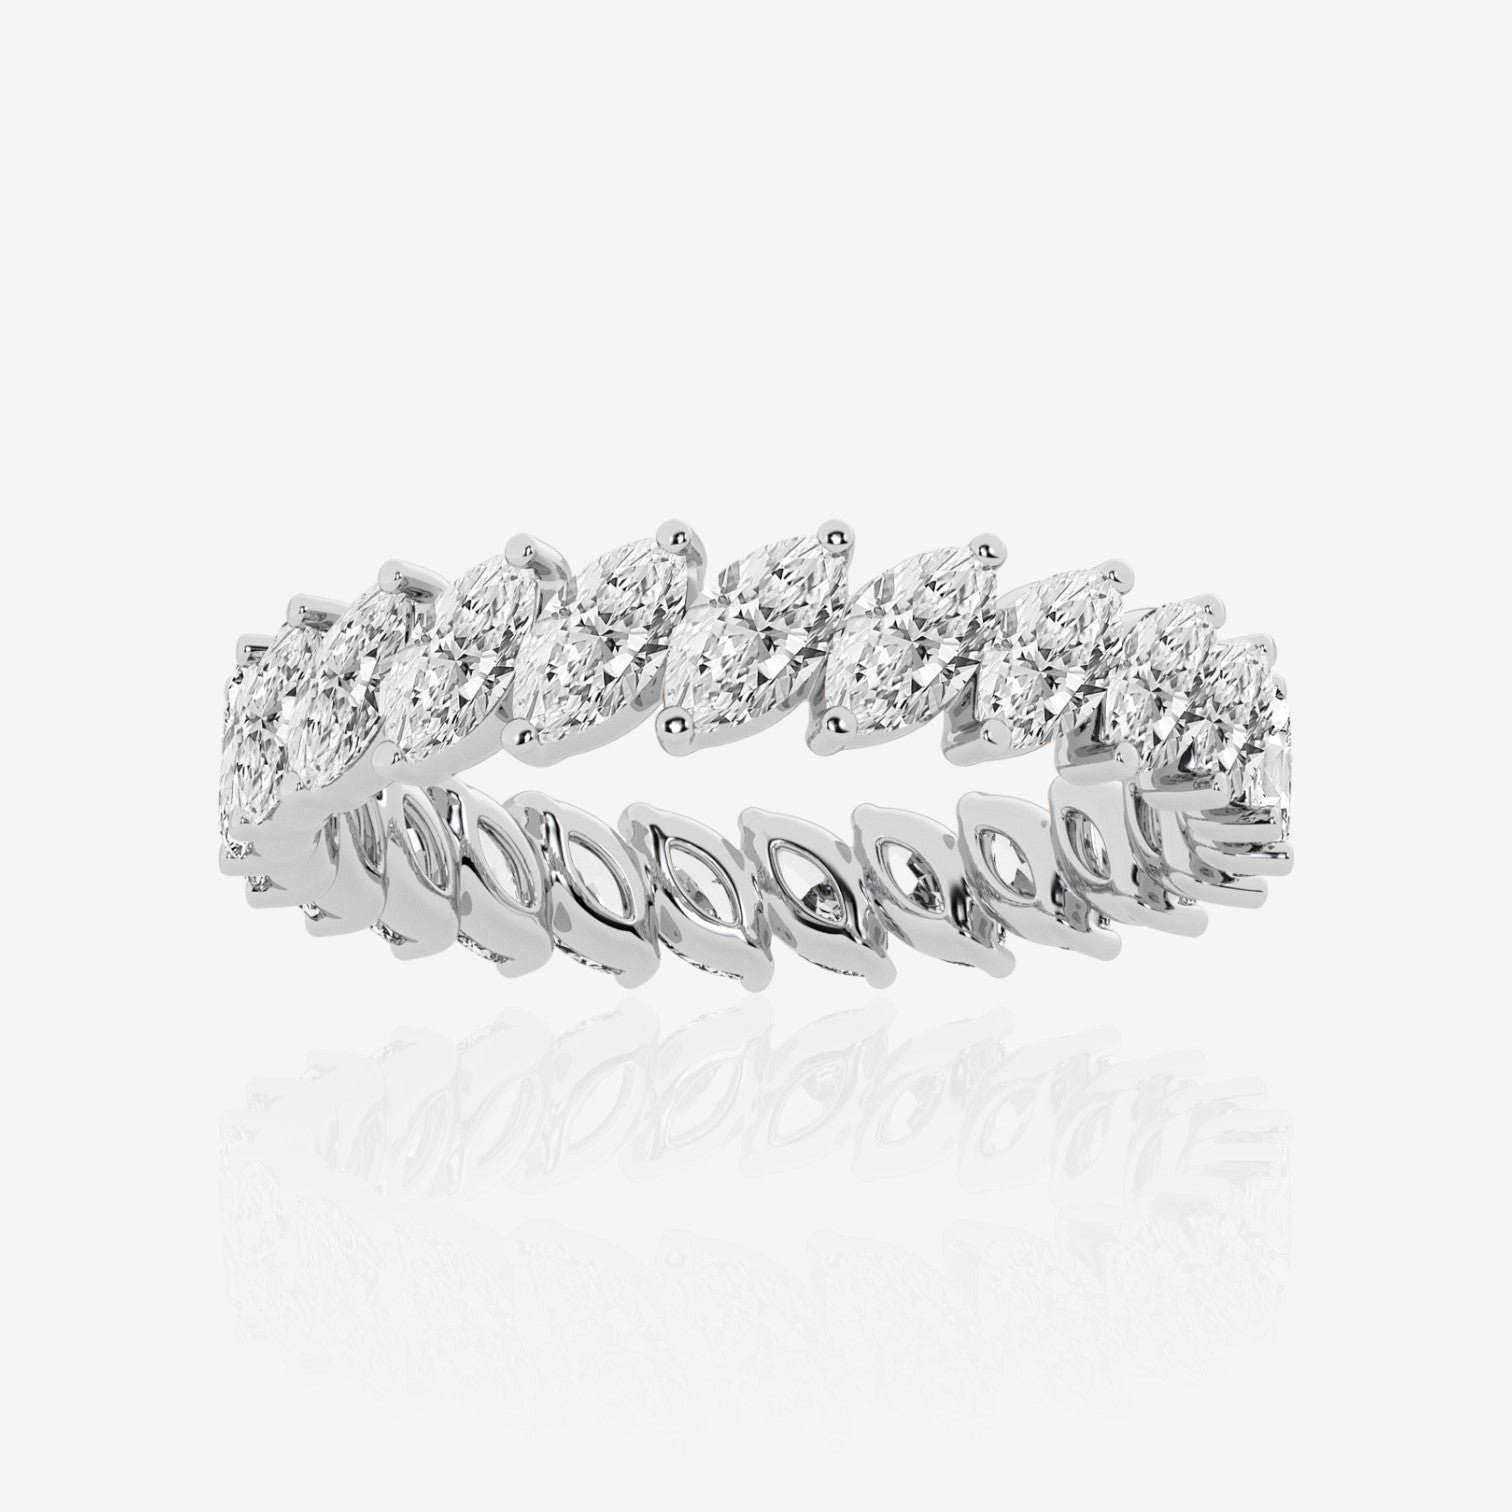 14kt white gold/2.00 ctw/4/4.25/4.5/4.75/5/5.25/5.5/5.75/6/6.25/6.5/6.75/7/7.25/7.5/7.75/8/8.25/8.5/8.75/9/top